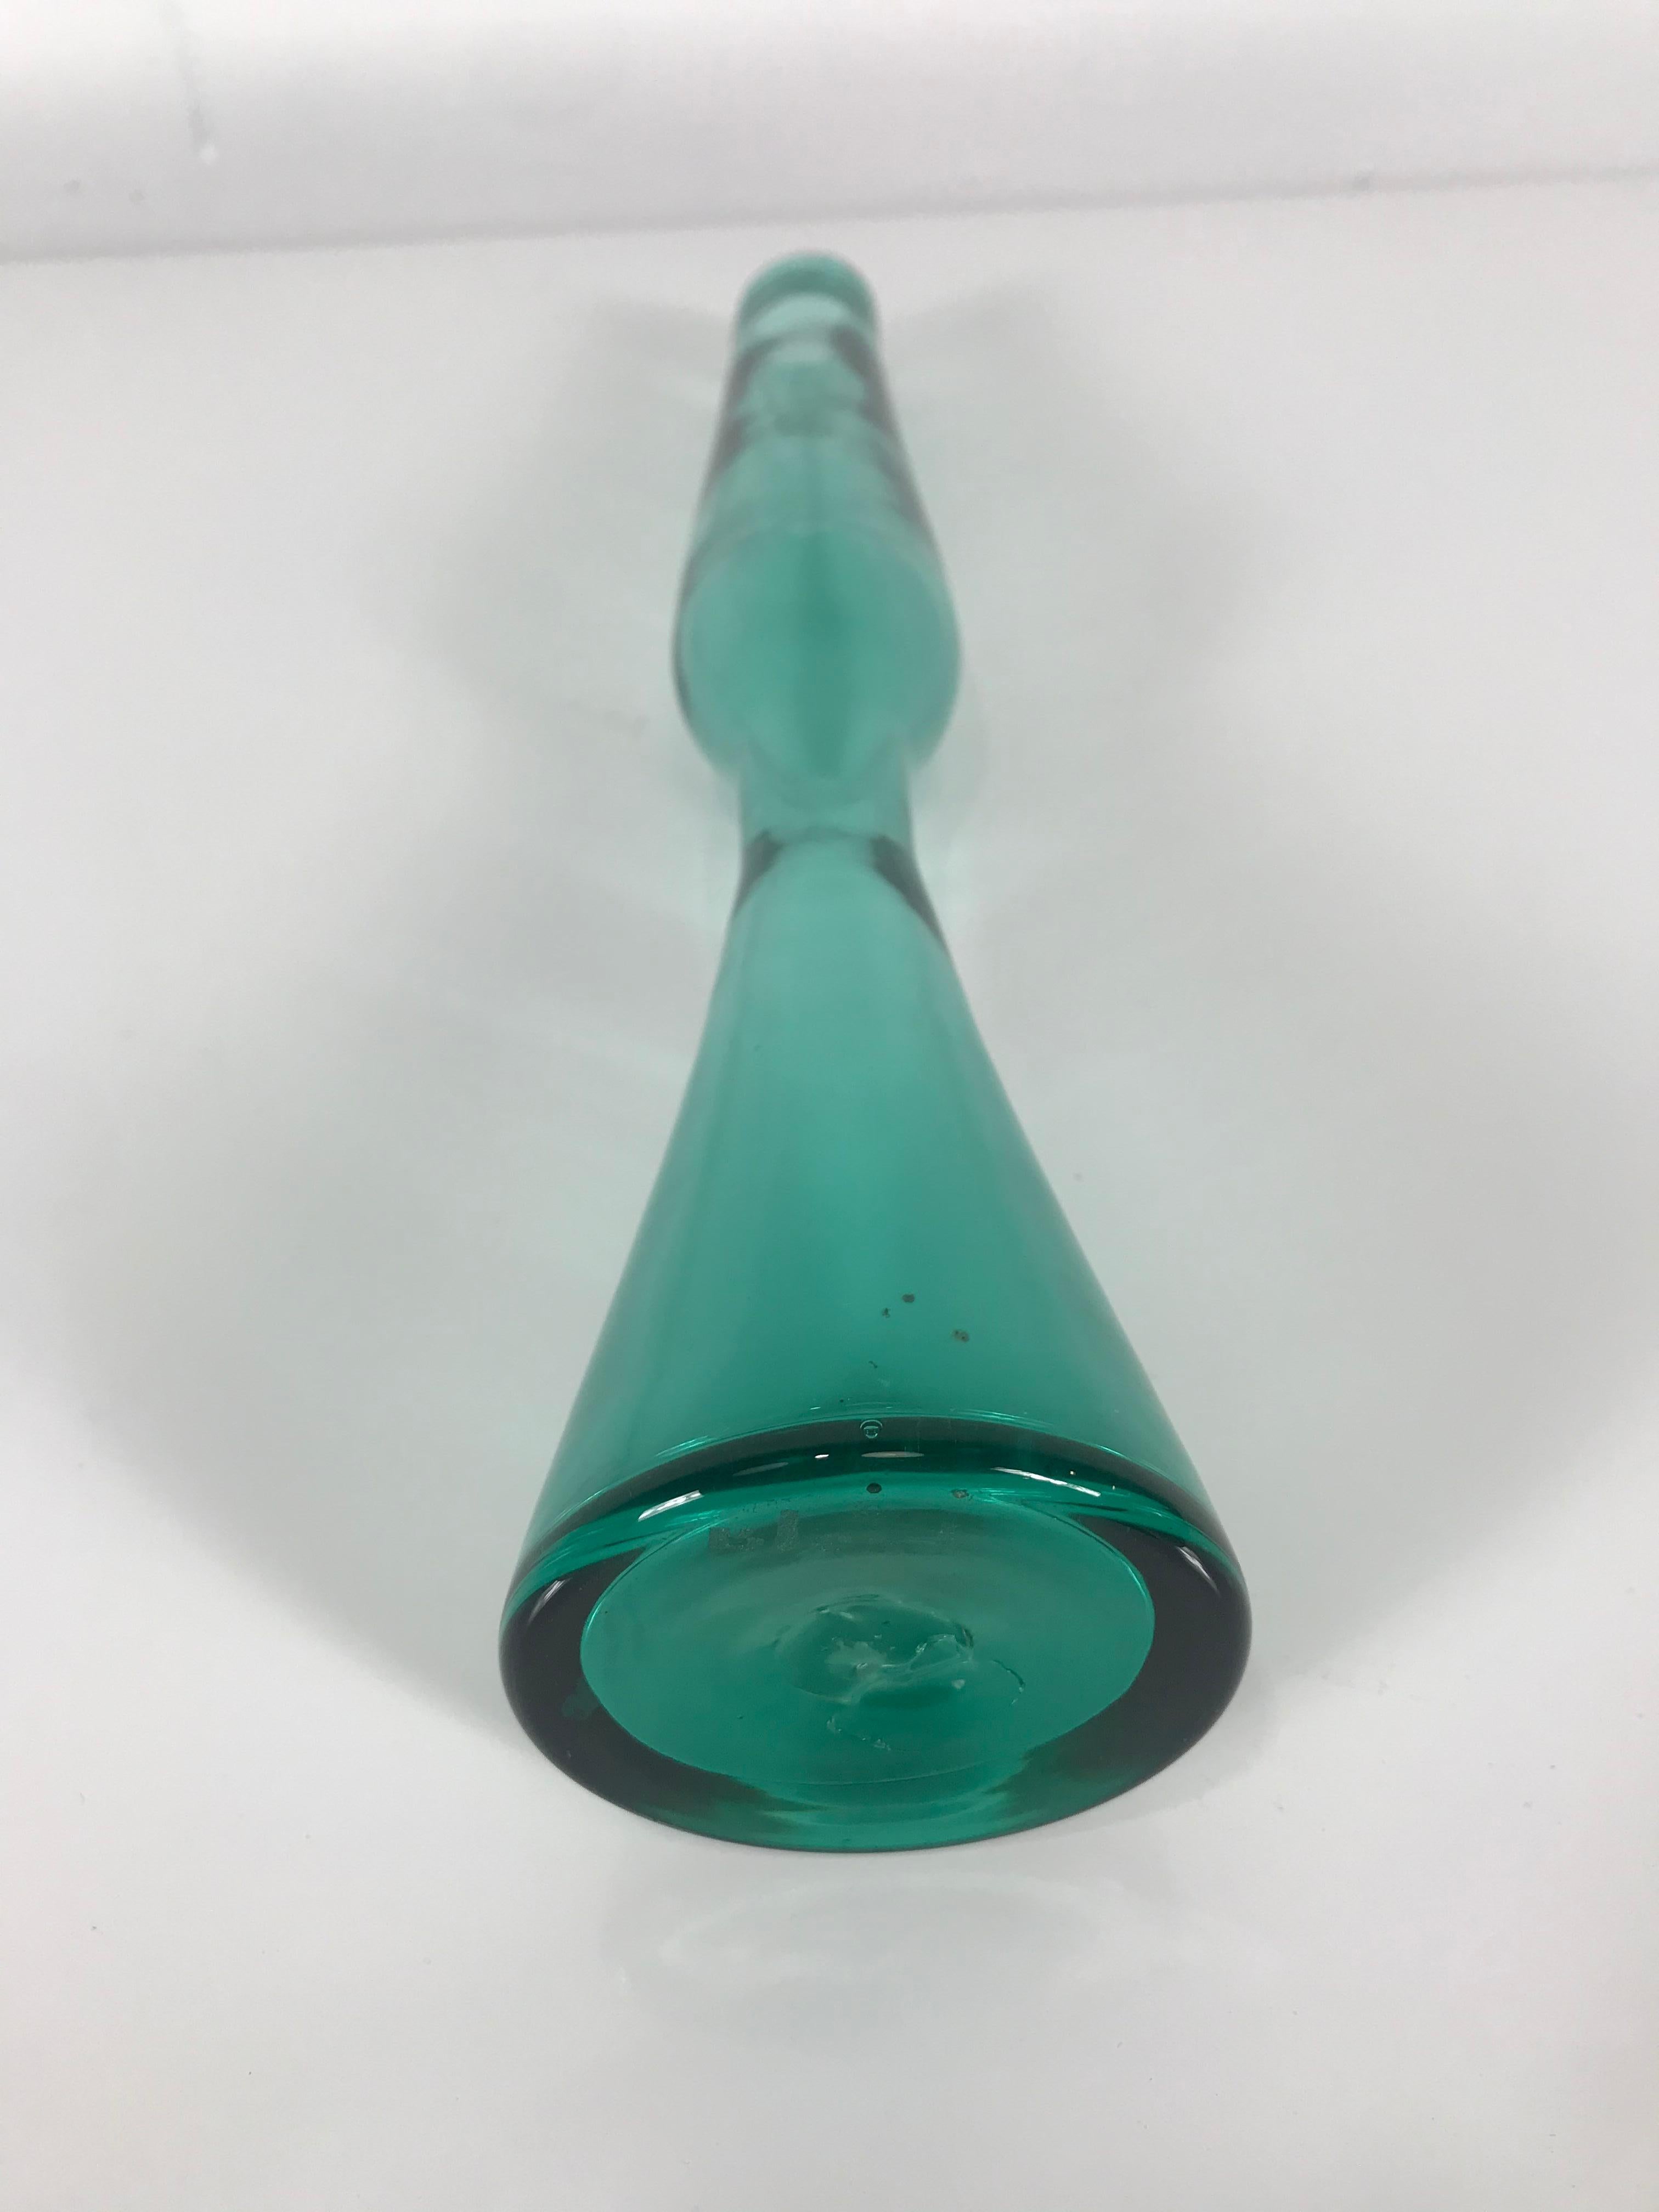 This is the taller of the scarce vase number 6024, also known as the Rocket vase, designed by Wayne Husted in the lovely teal green color that Blenko called 